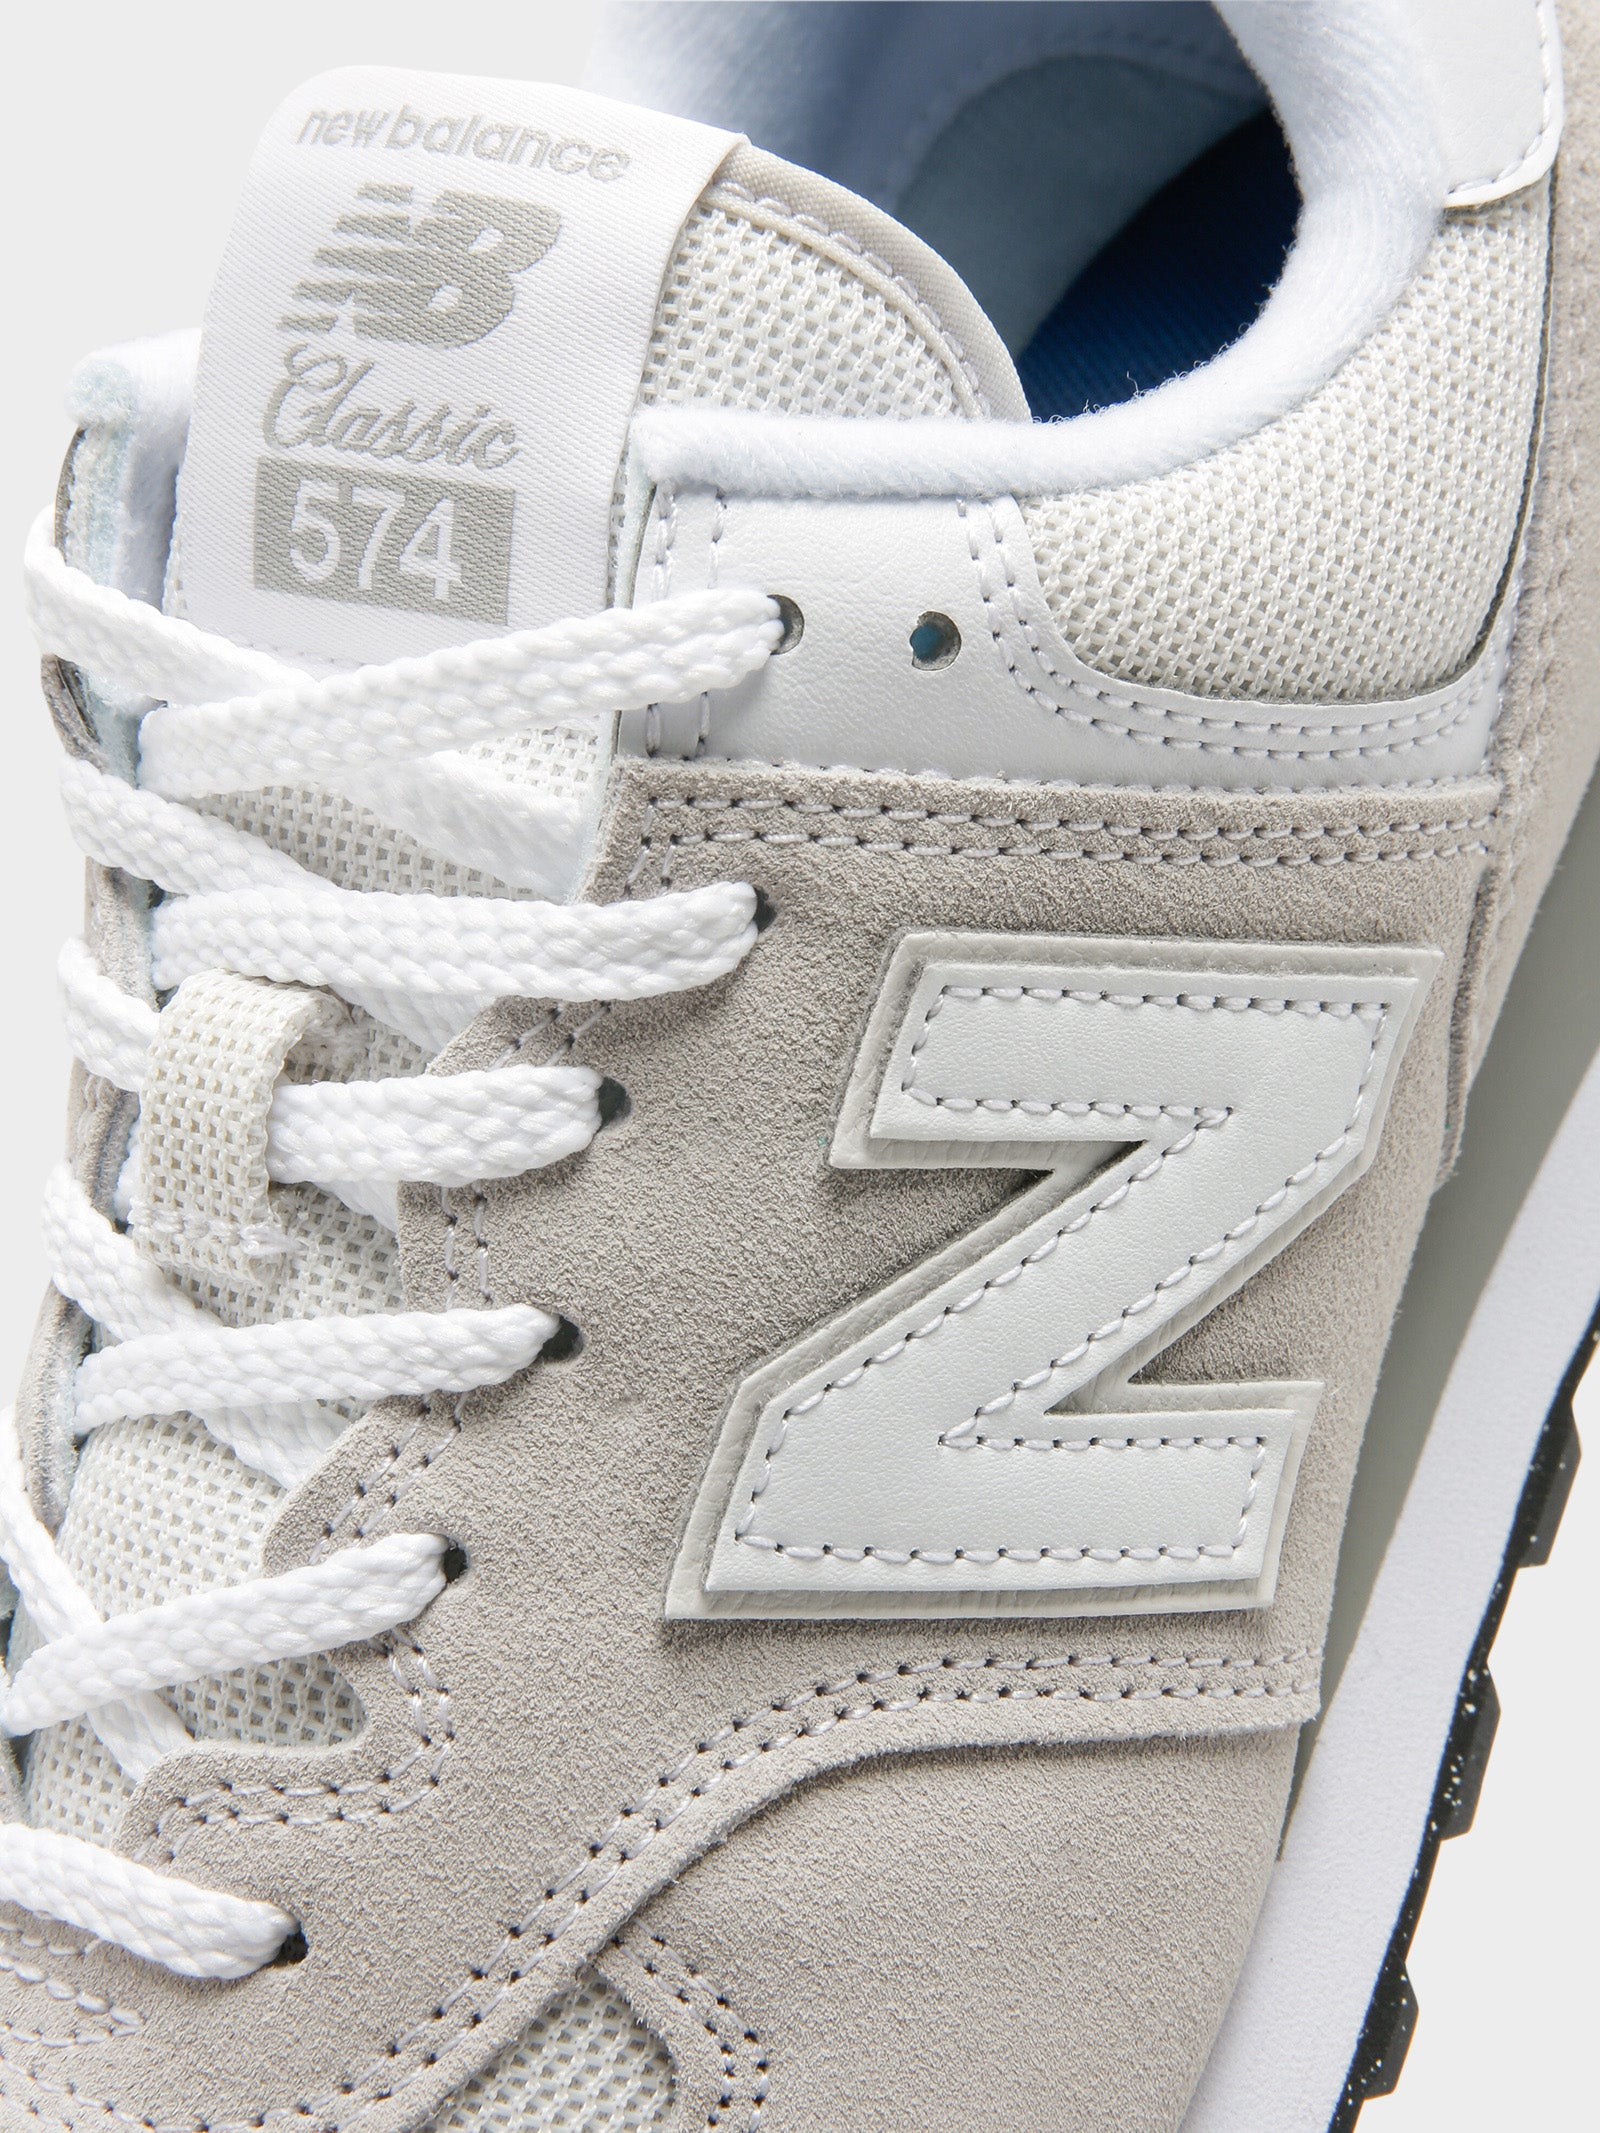 Womens 574 Sneakers in Grey & White